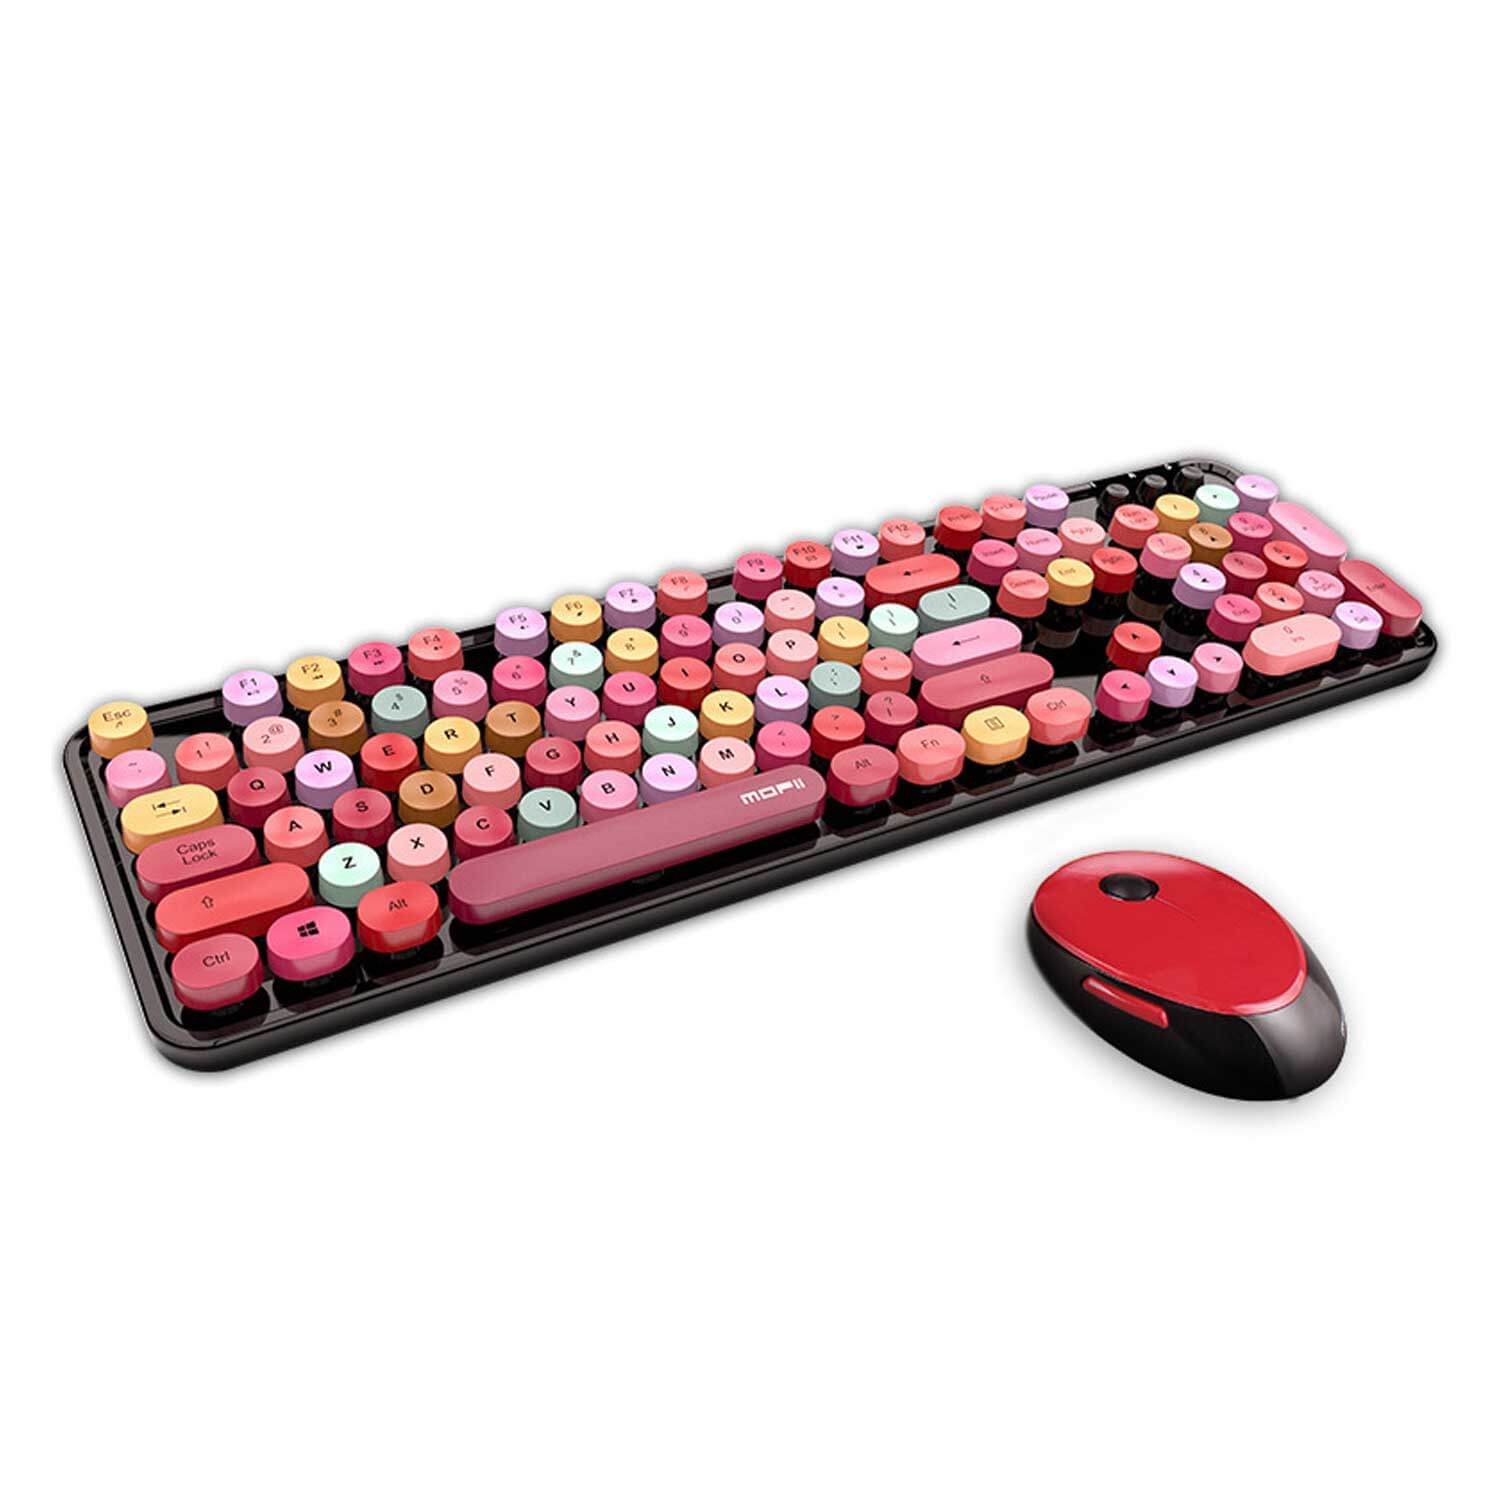 Mofii Wireless Keyboard and Mouse Combo Black & Red